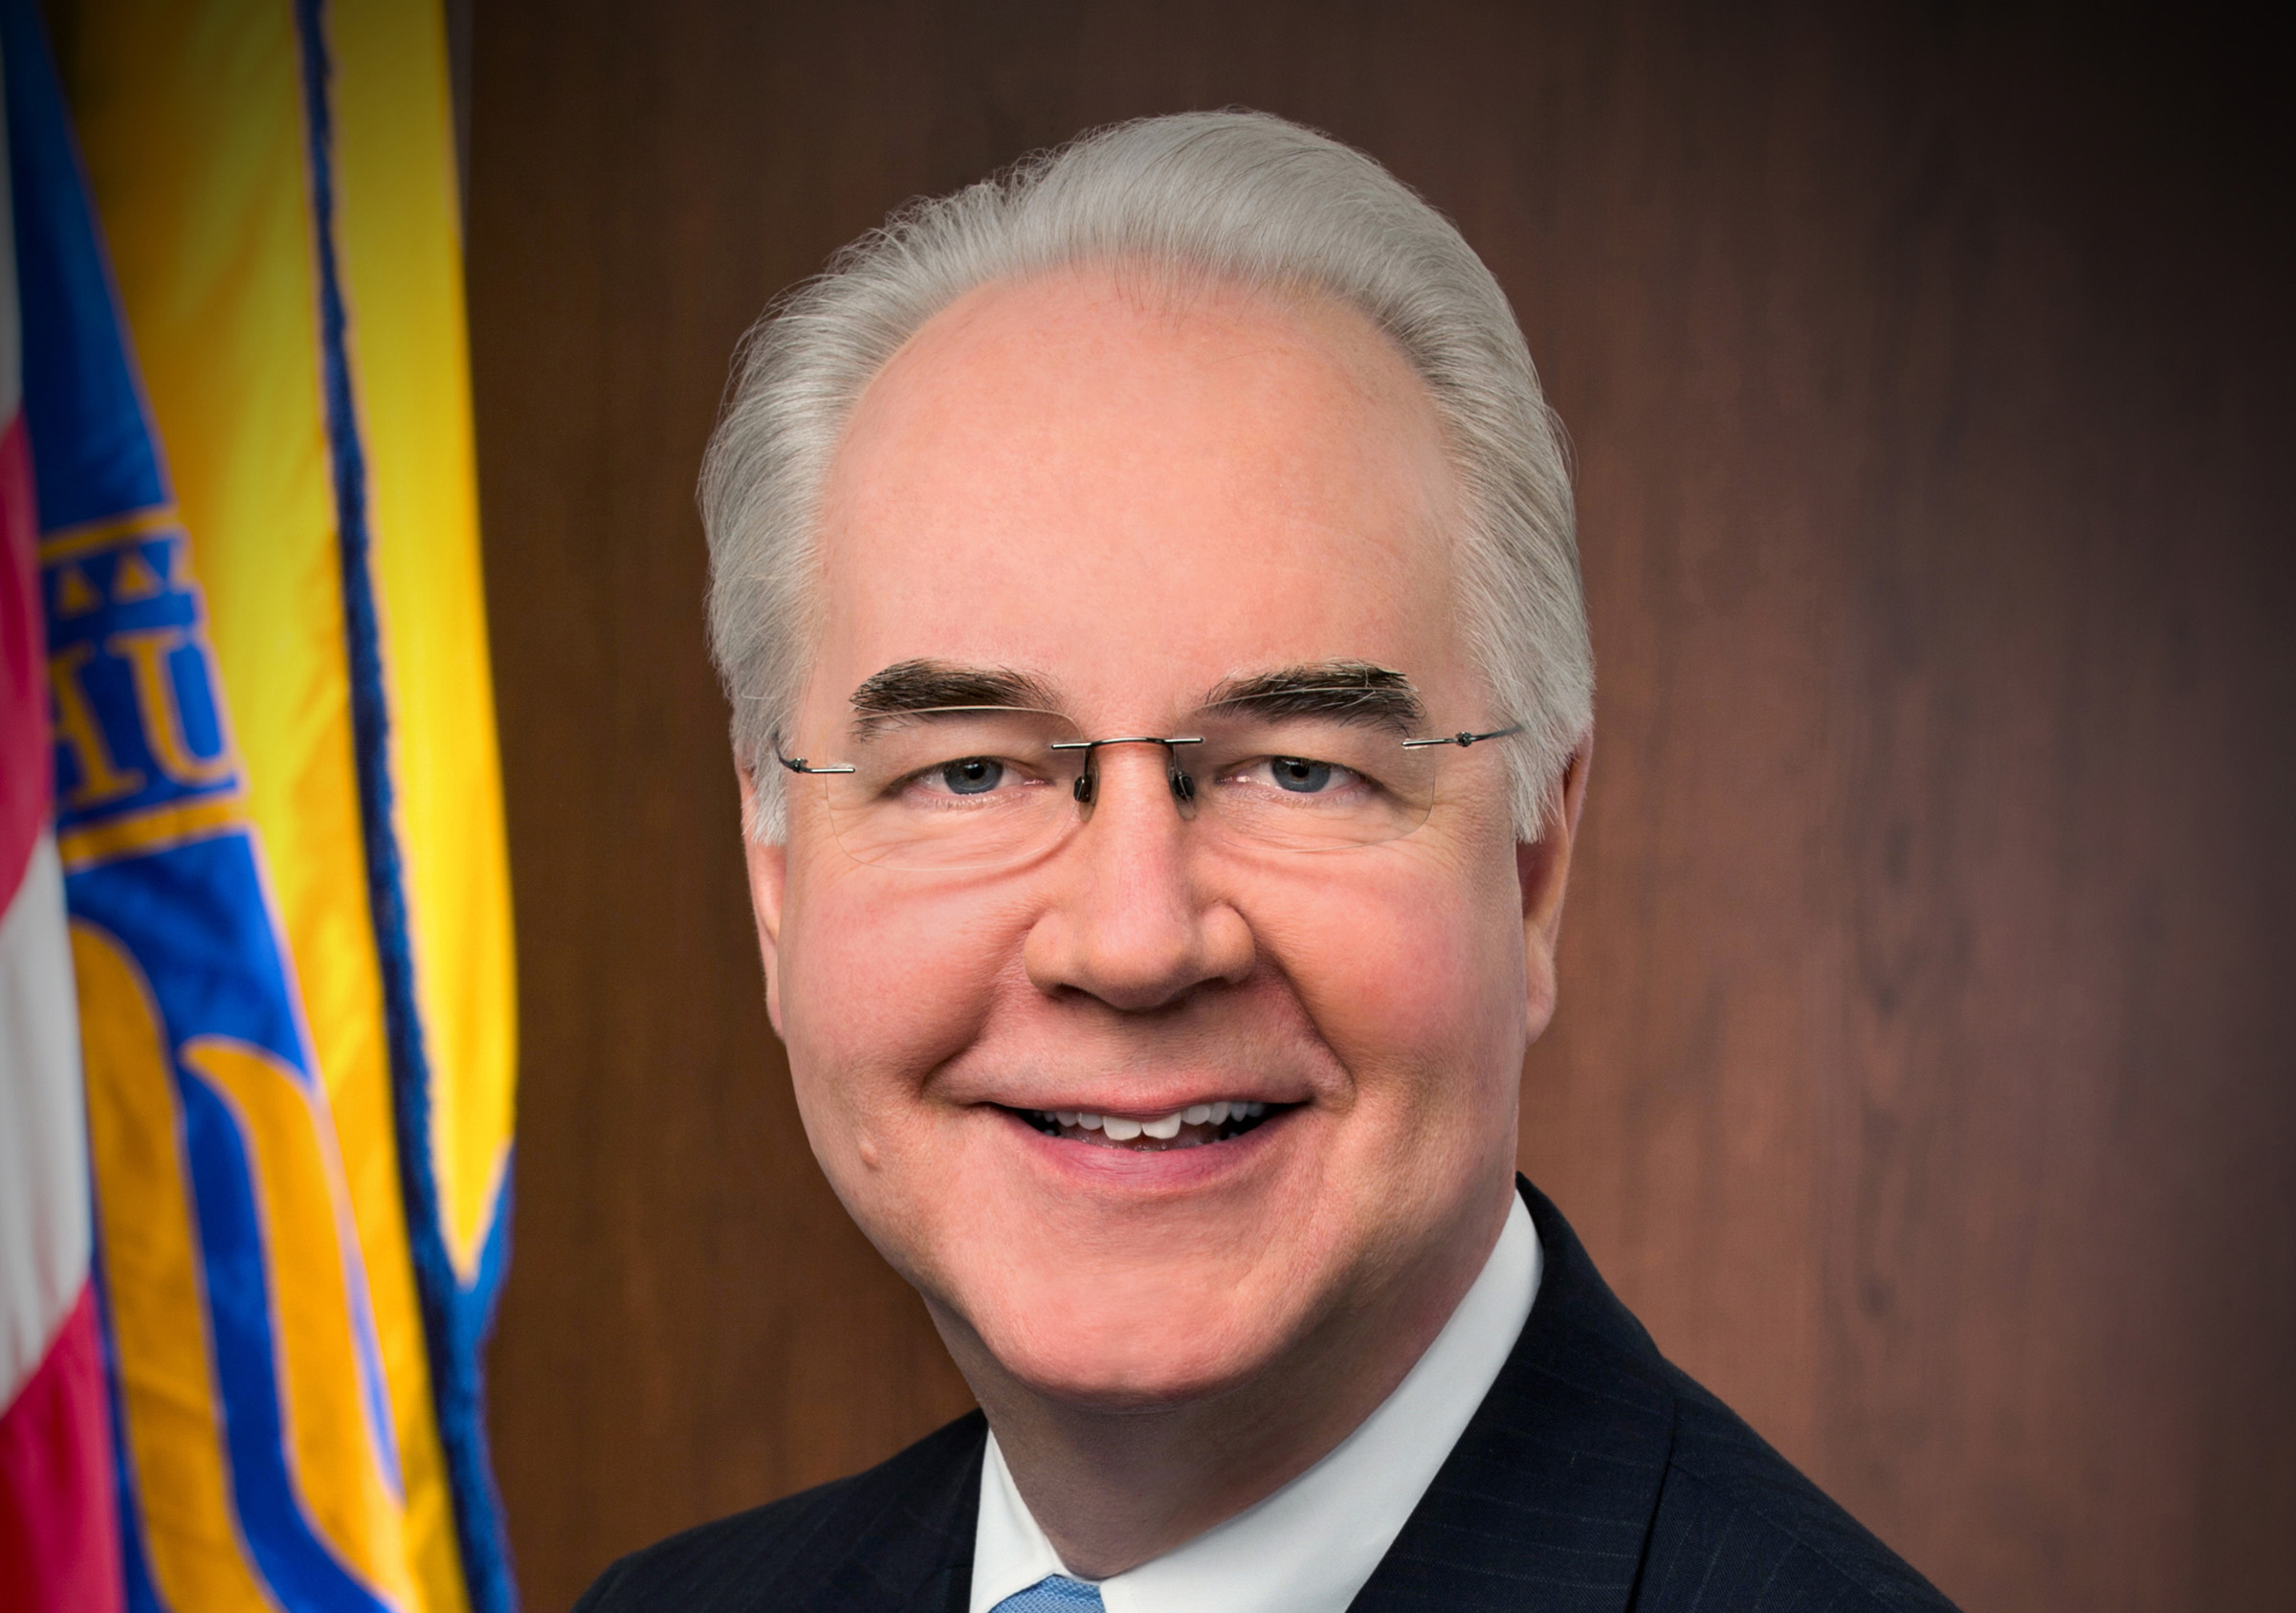 Health & Human Services Secretary Tom Price Resigns Amid Private Jet Scandal